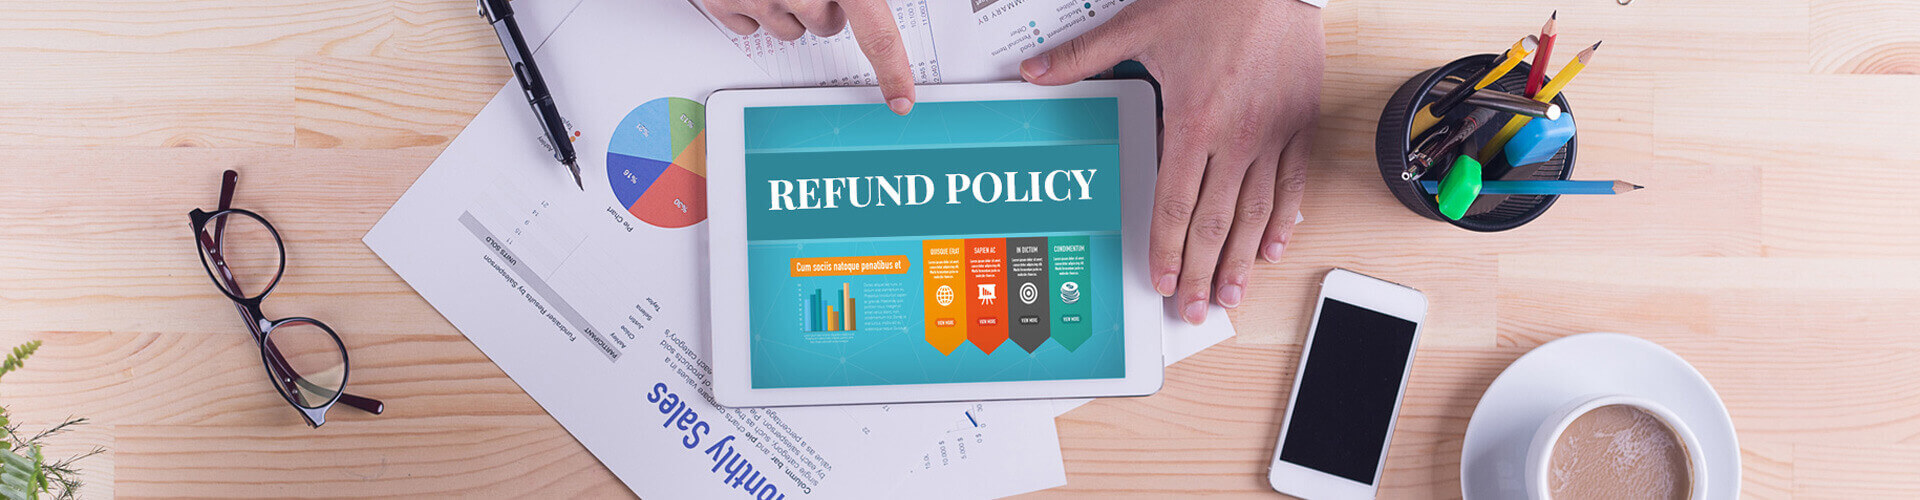 Privacy Policy and Refund